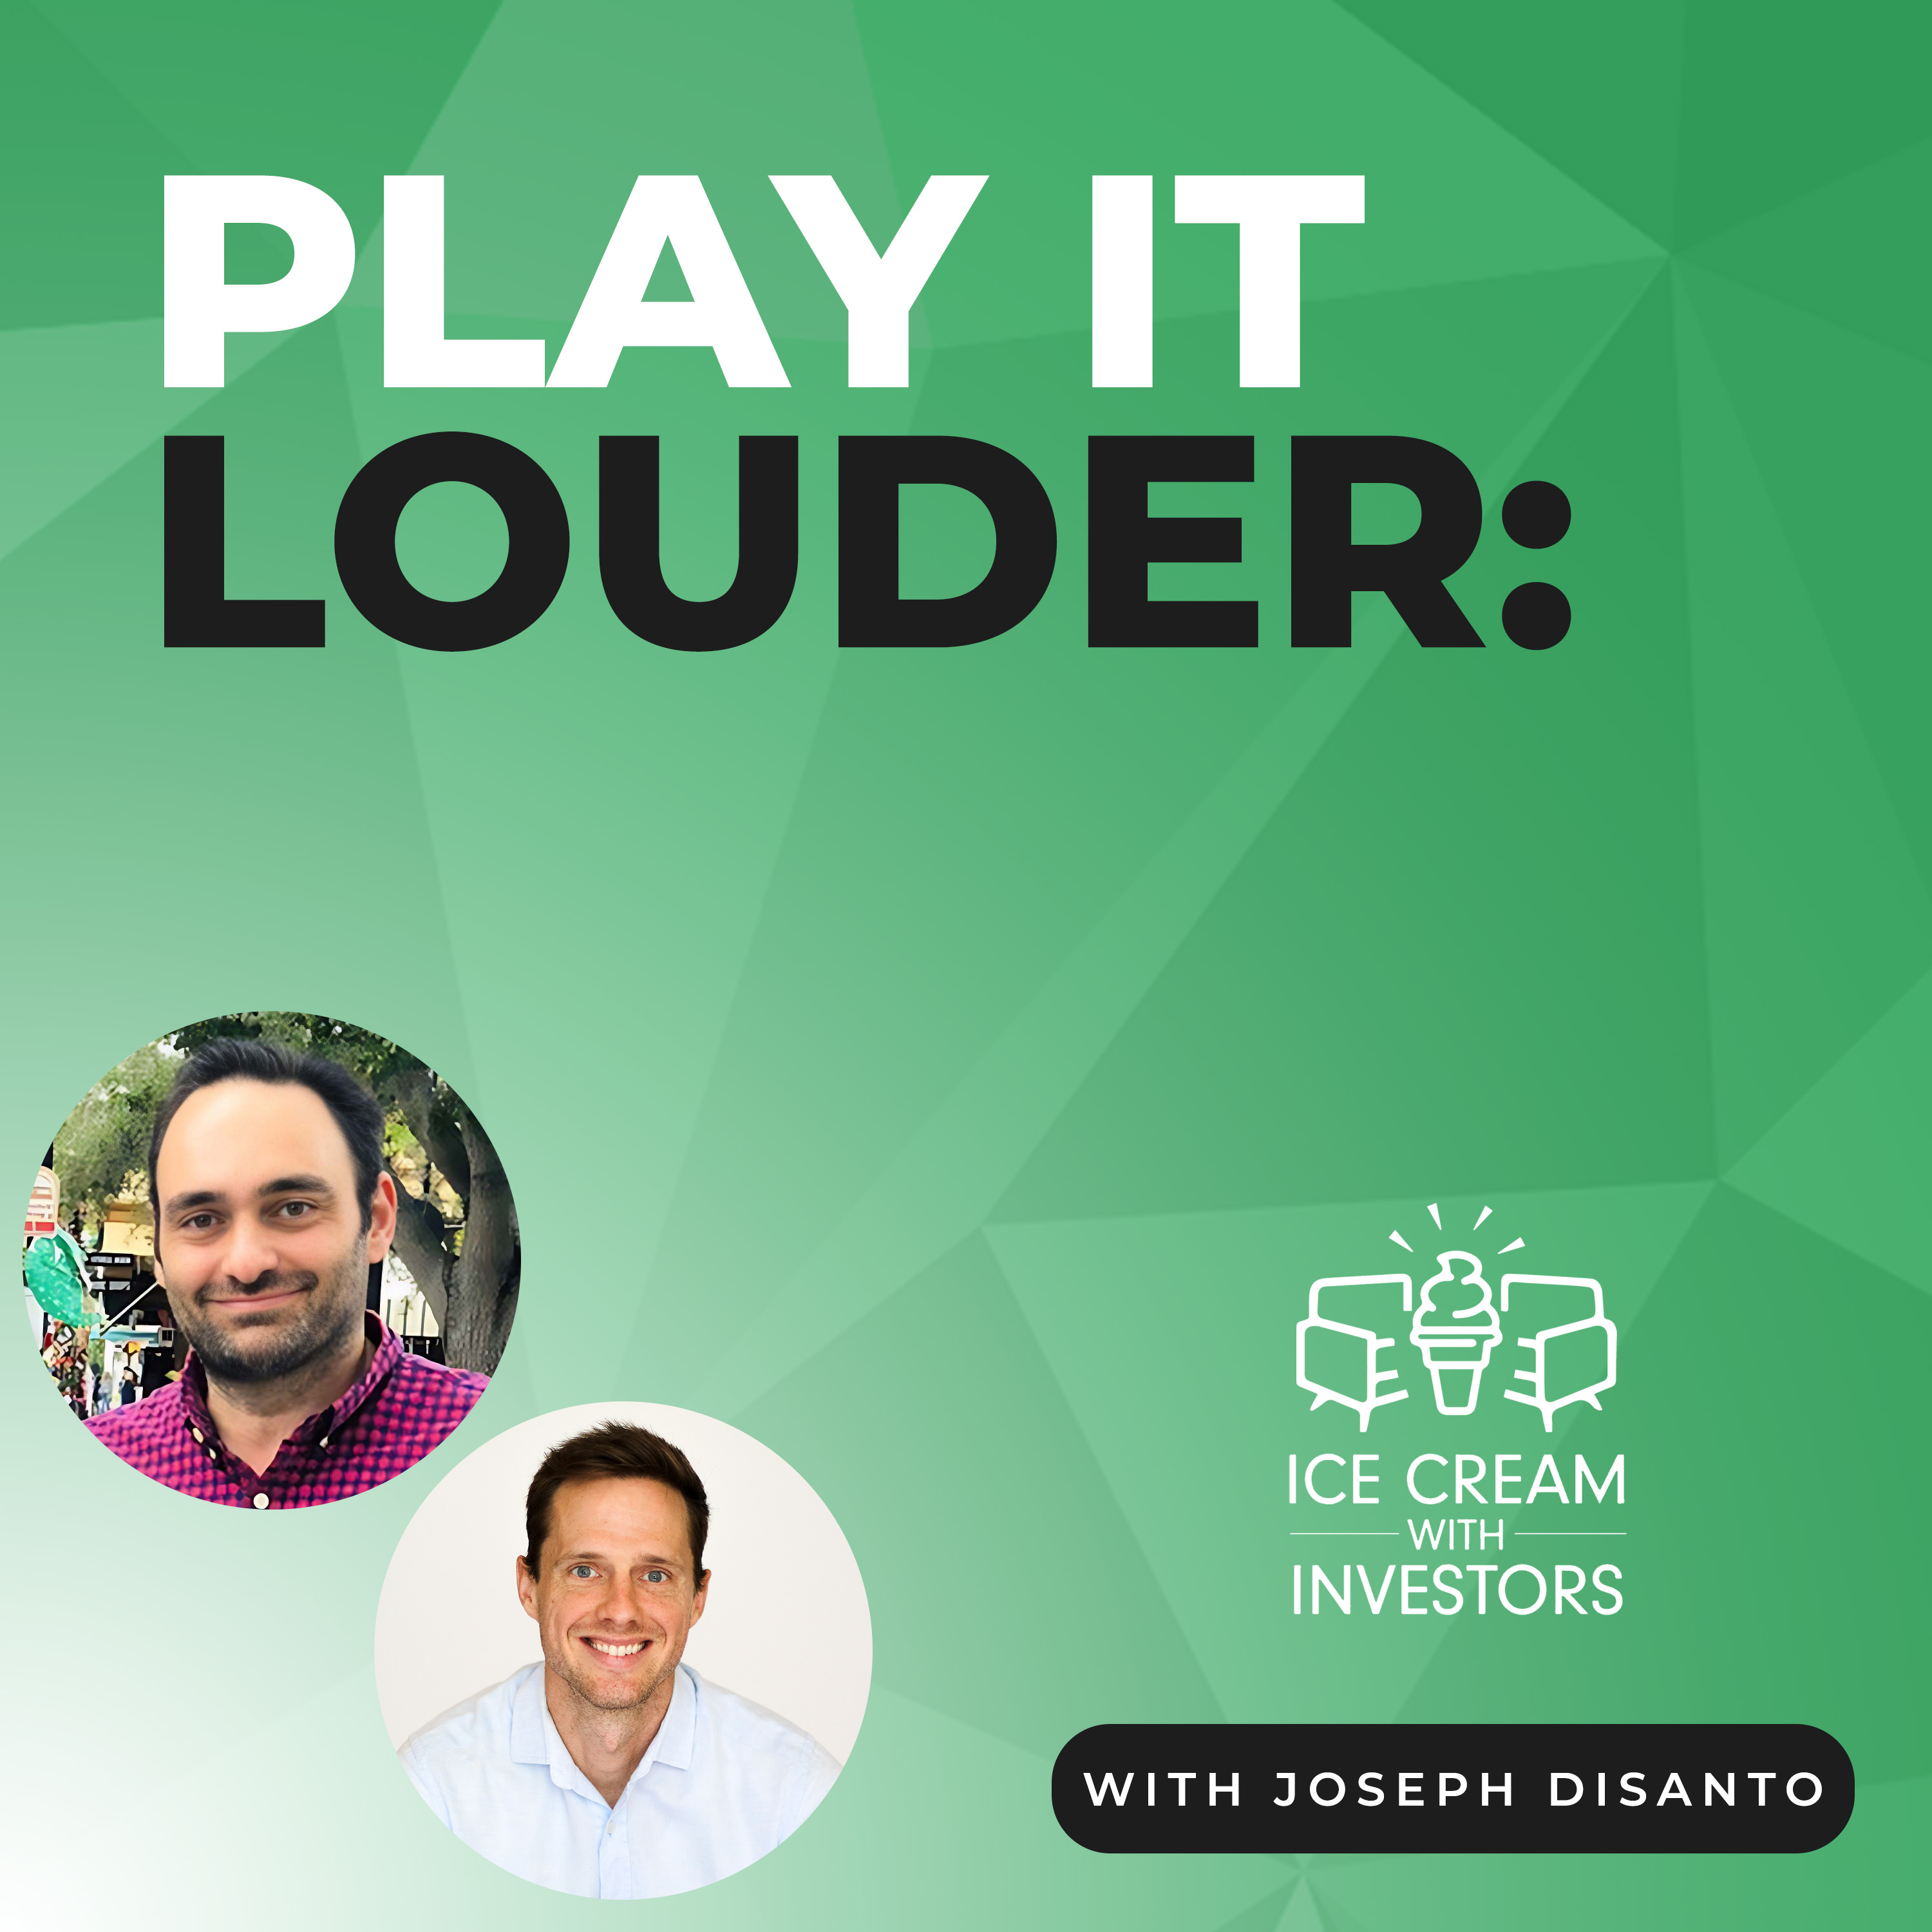 Artwork for podcast Ice Cream with Investors